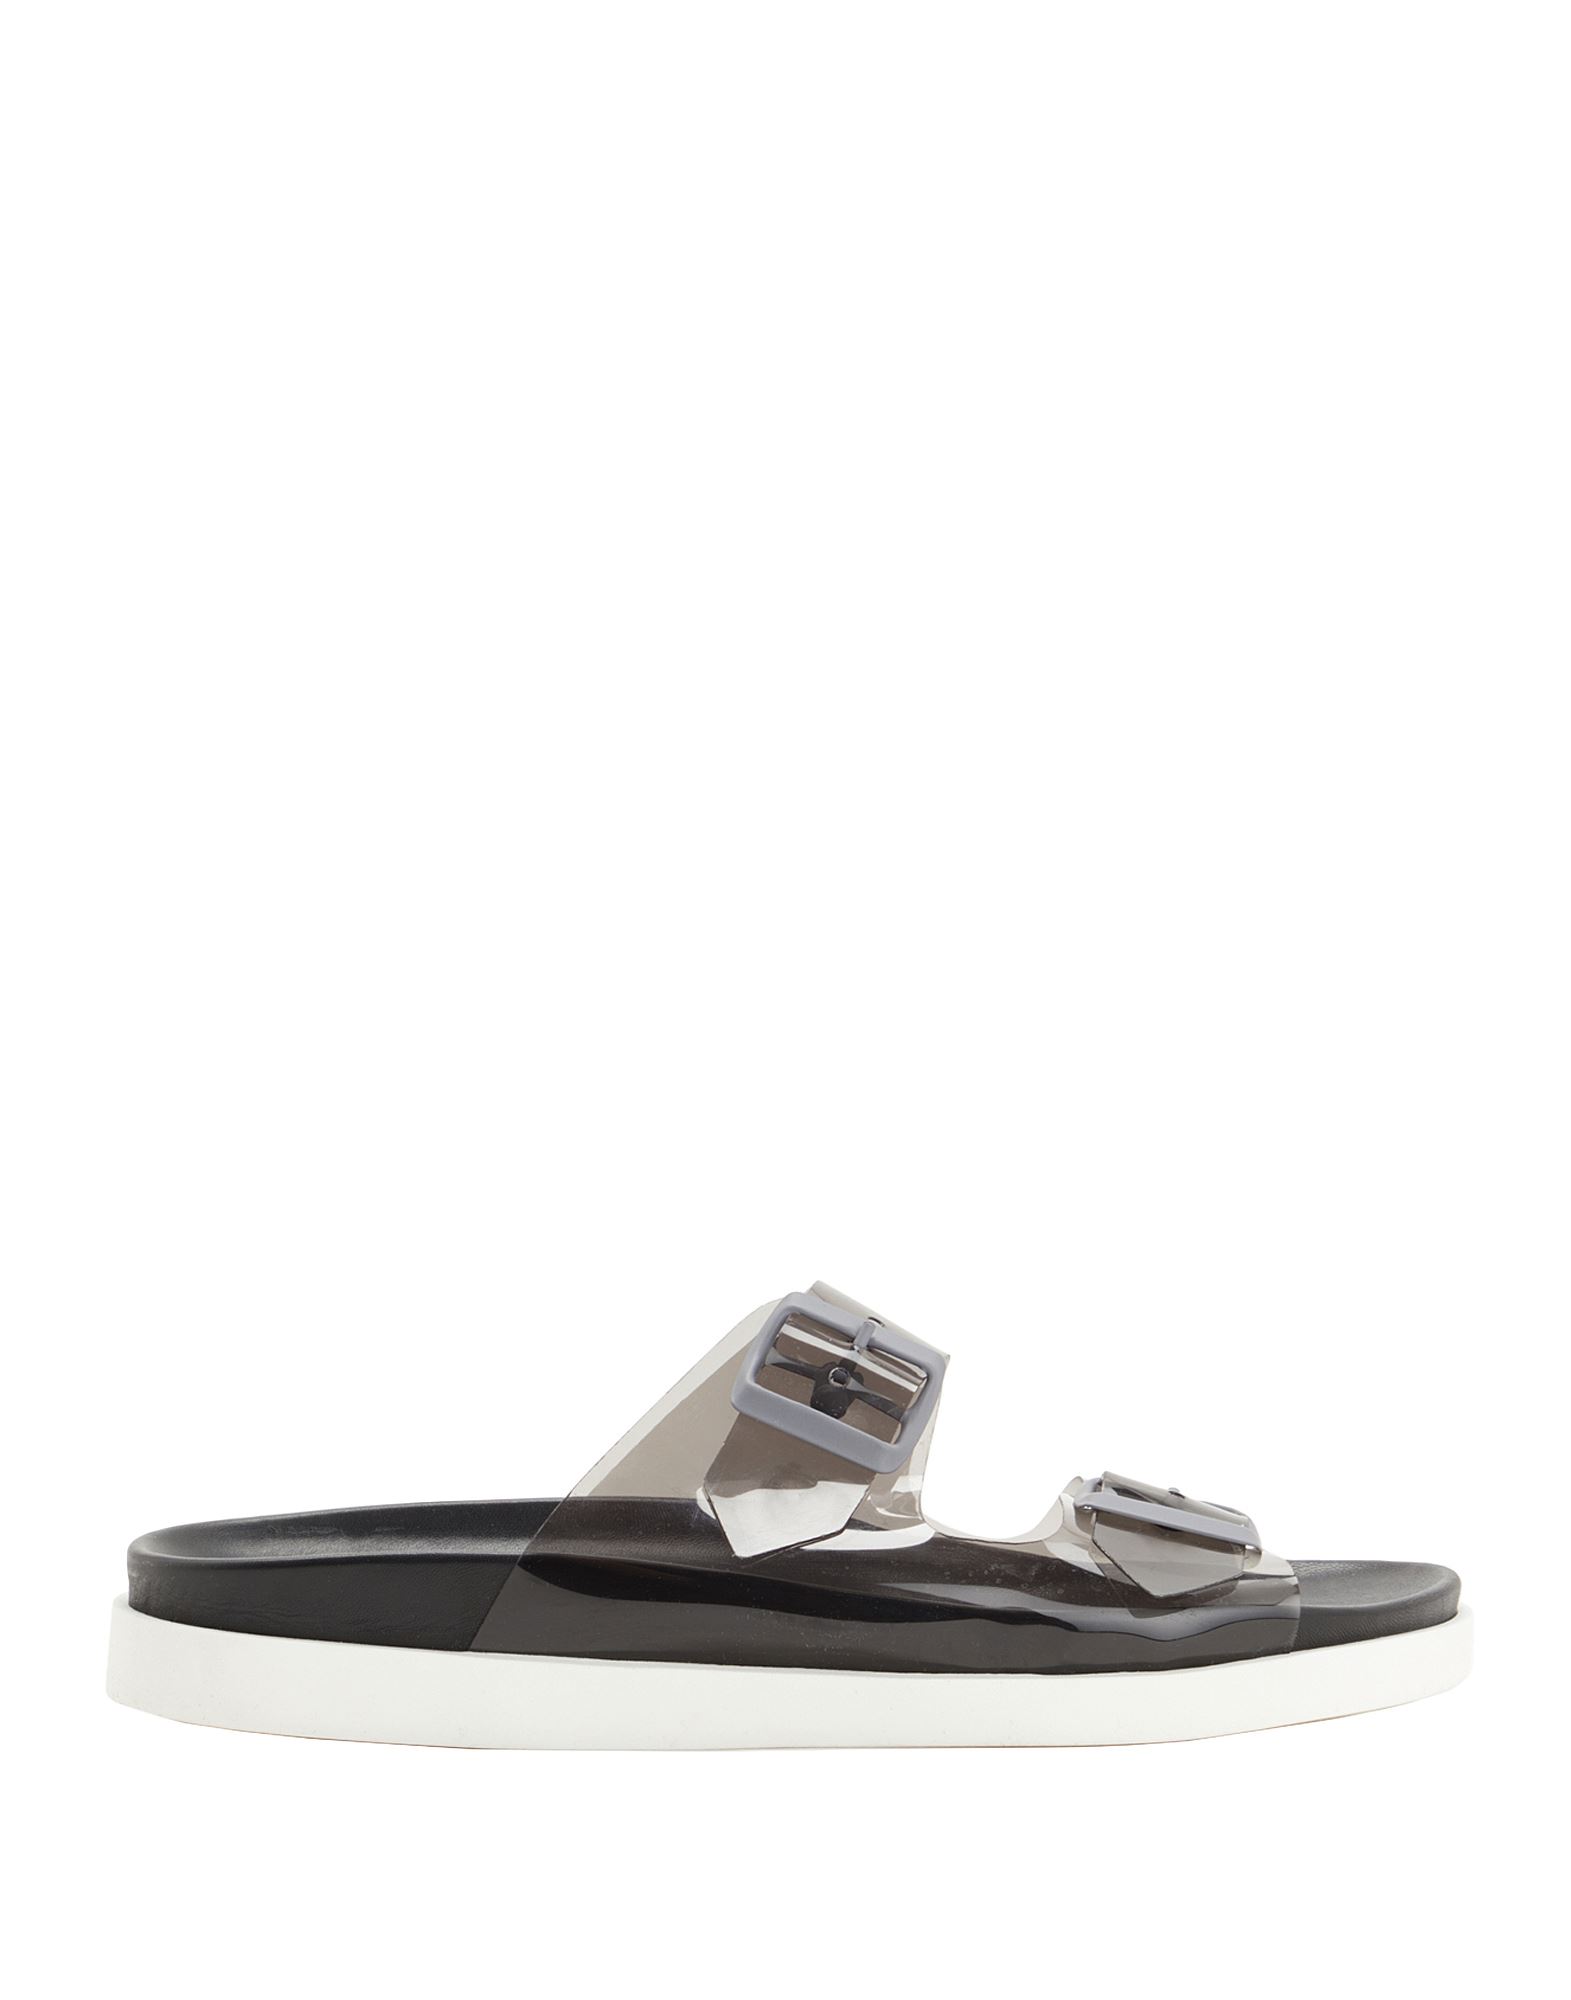 8 By Yoox Sandals In Grey